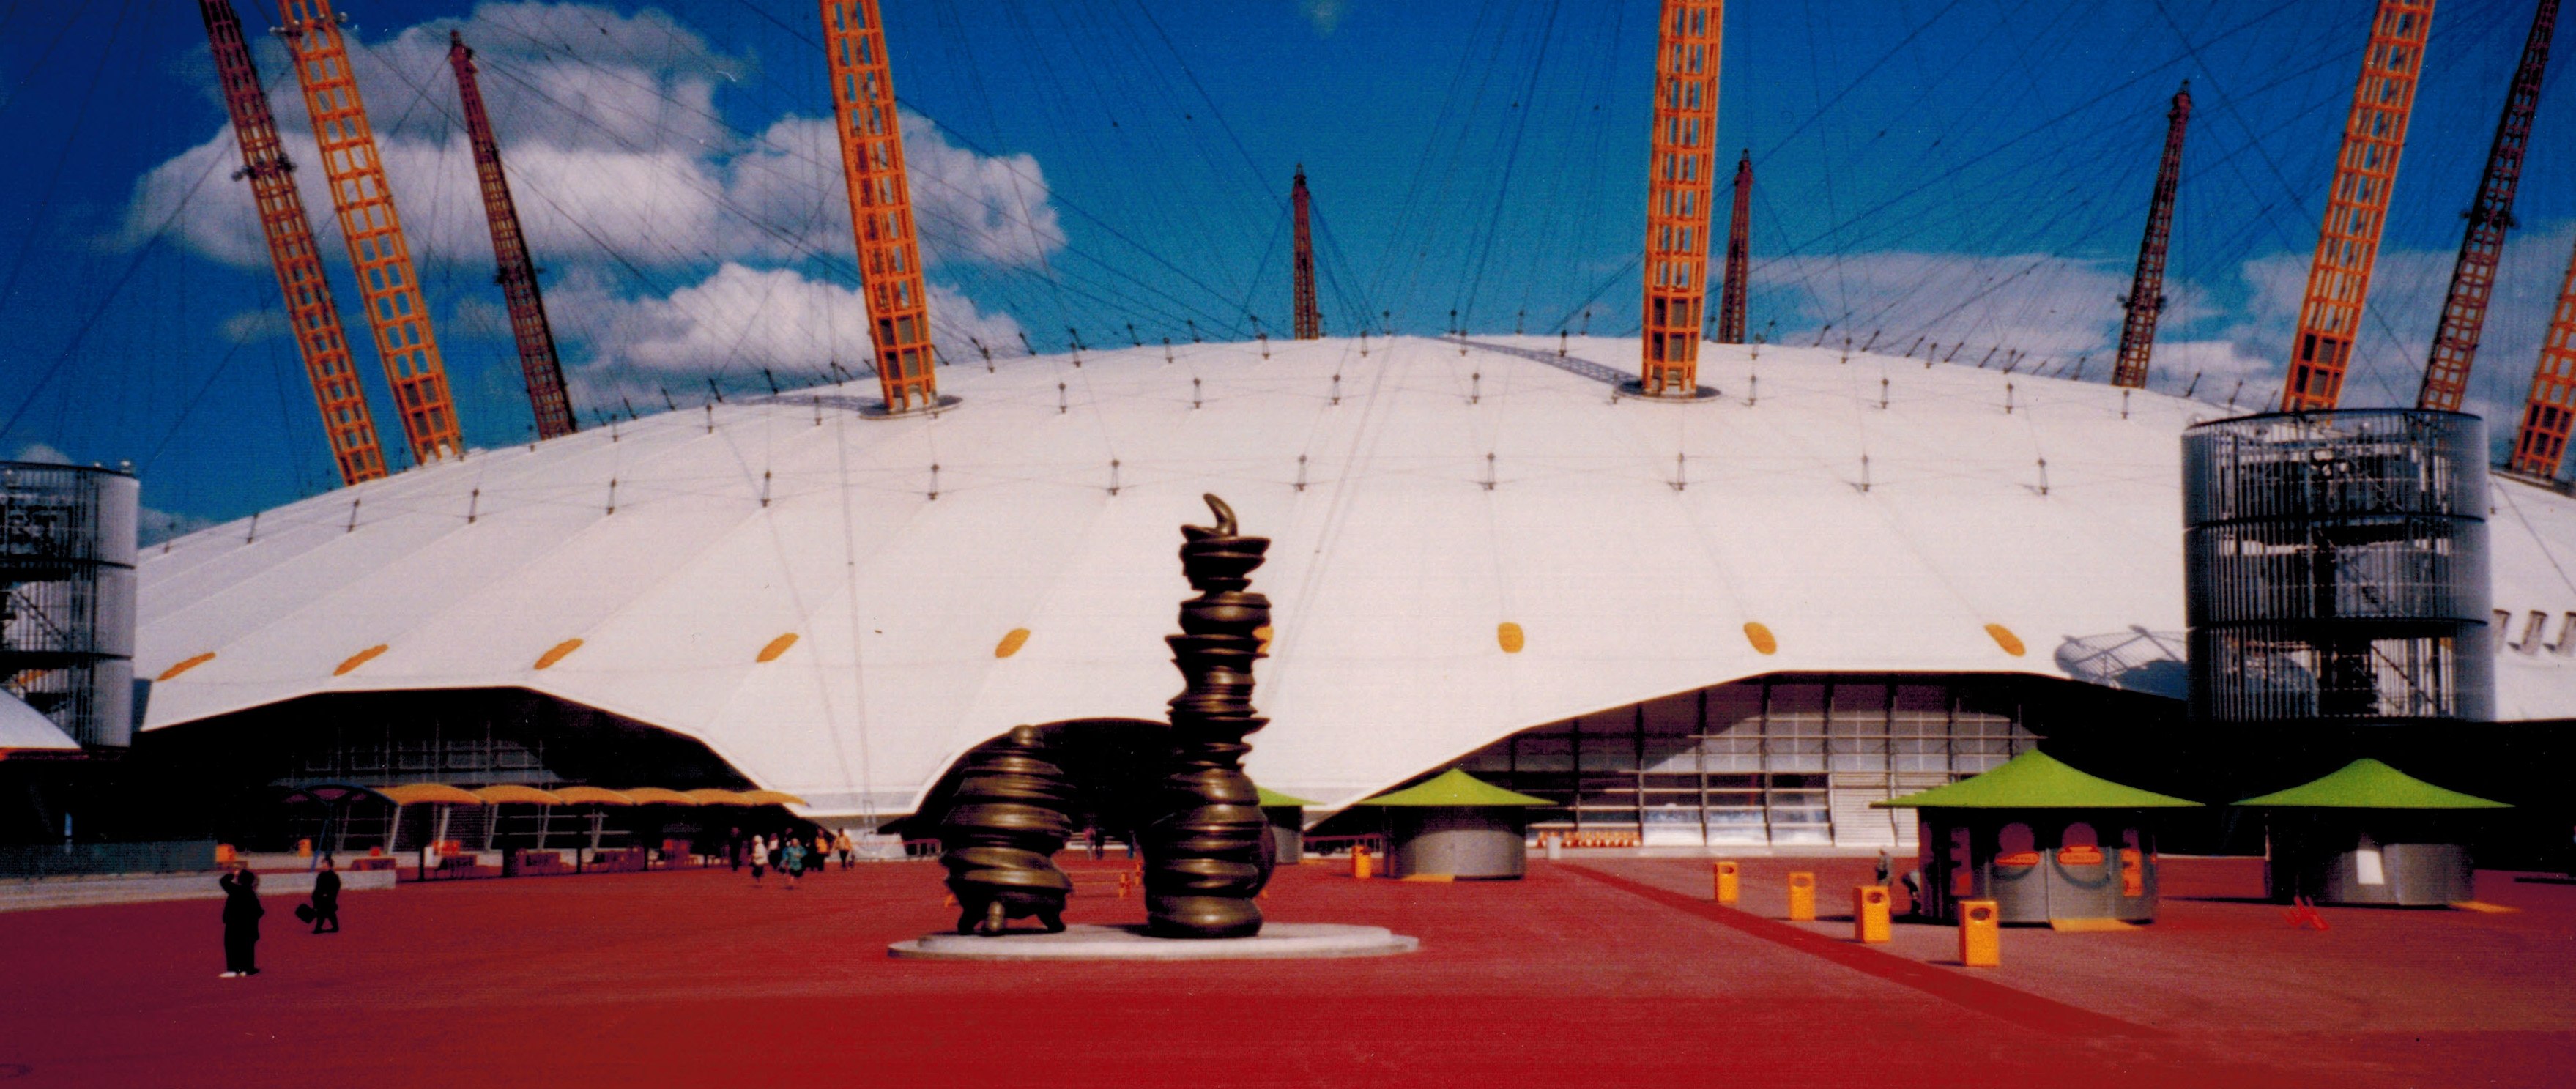 Tony cragg sculptures outside the millennium dome.jpg